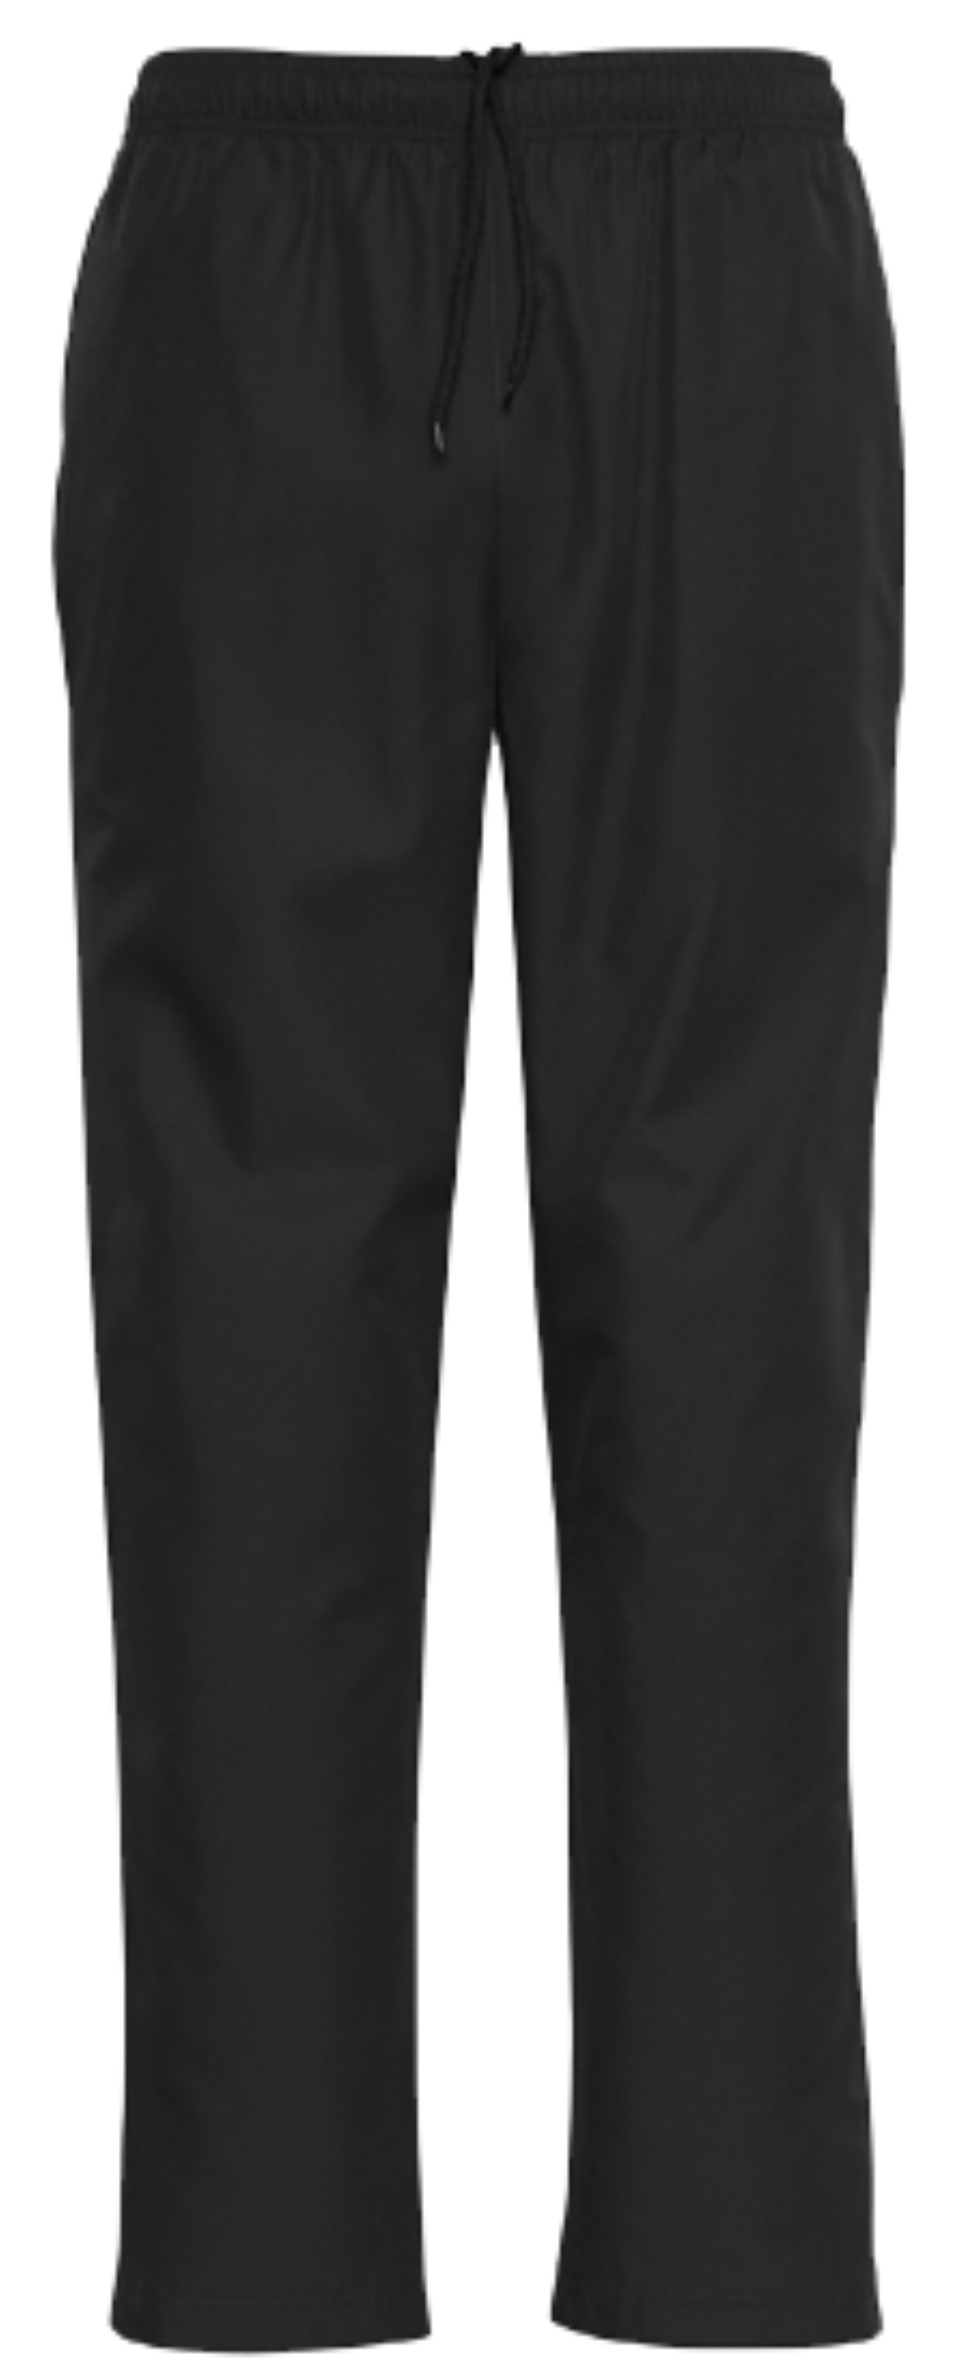 SDMHA Adult and Youth Track Pants